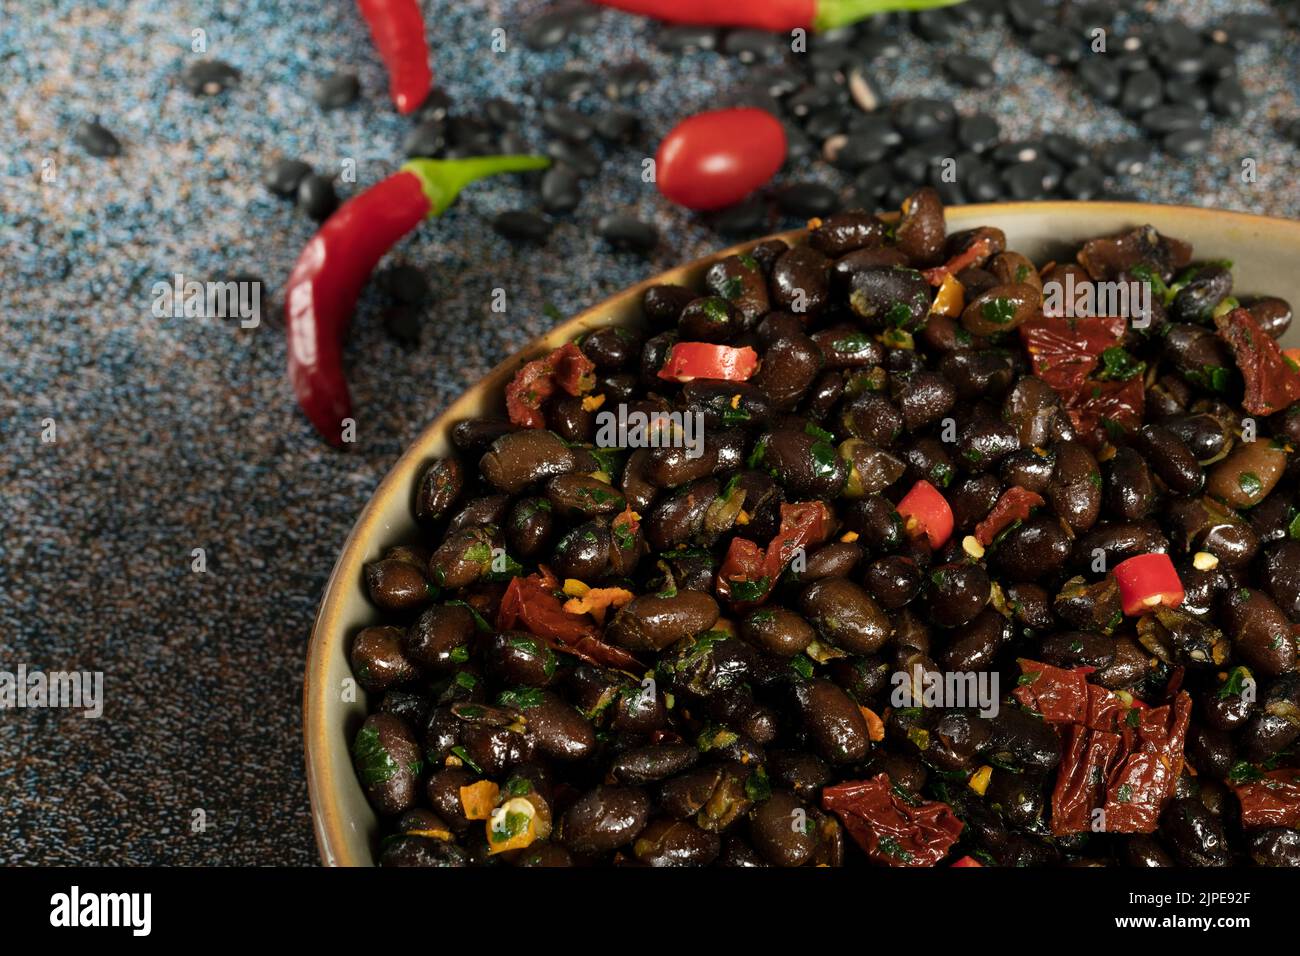 Macro close up of black beans with dried tomatoes and red Cayenne chili peppers in a brown dish. Stock Photo